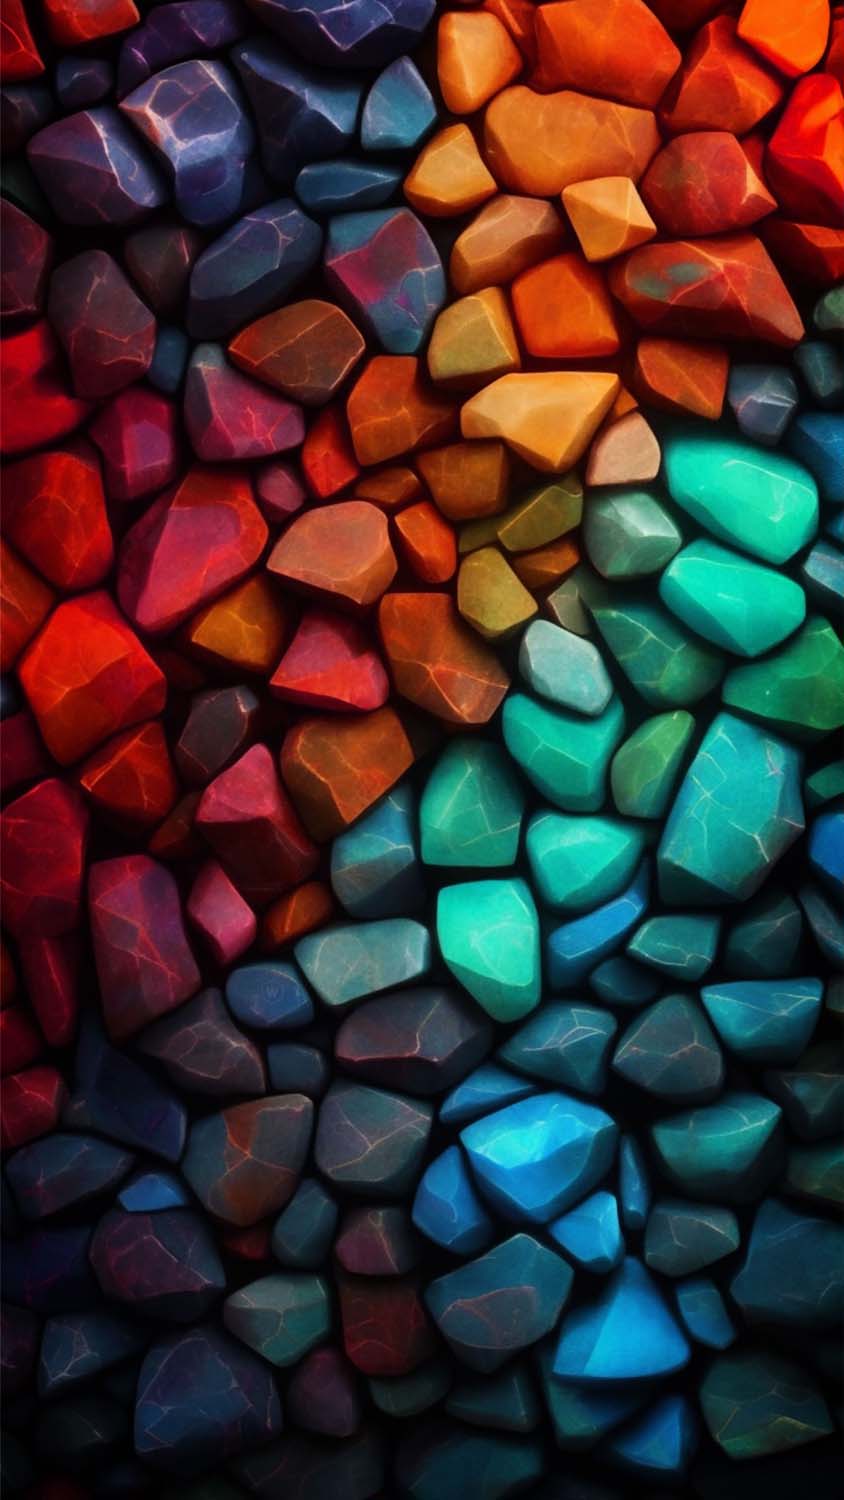 Colorful Stones Pattern iPhone Wallpaper 4K